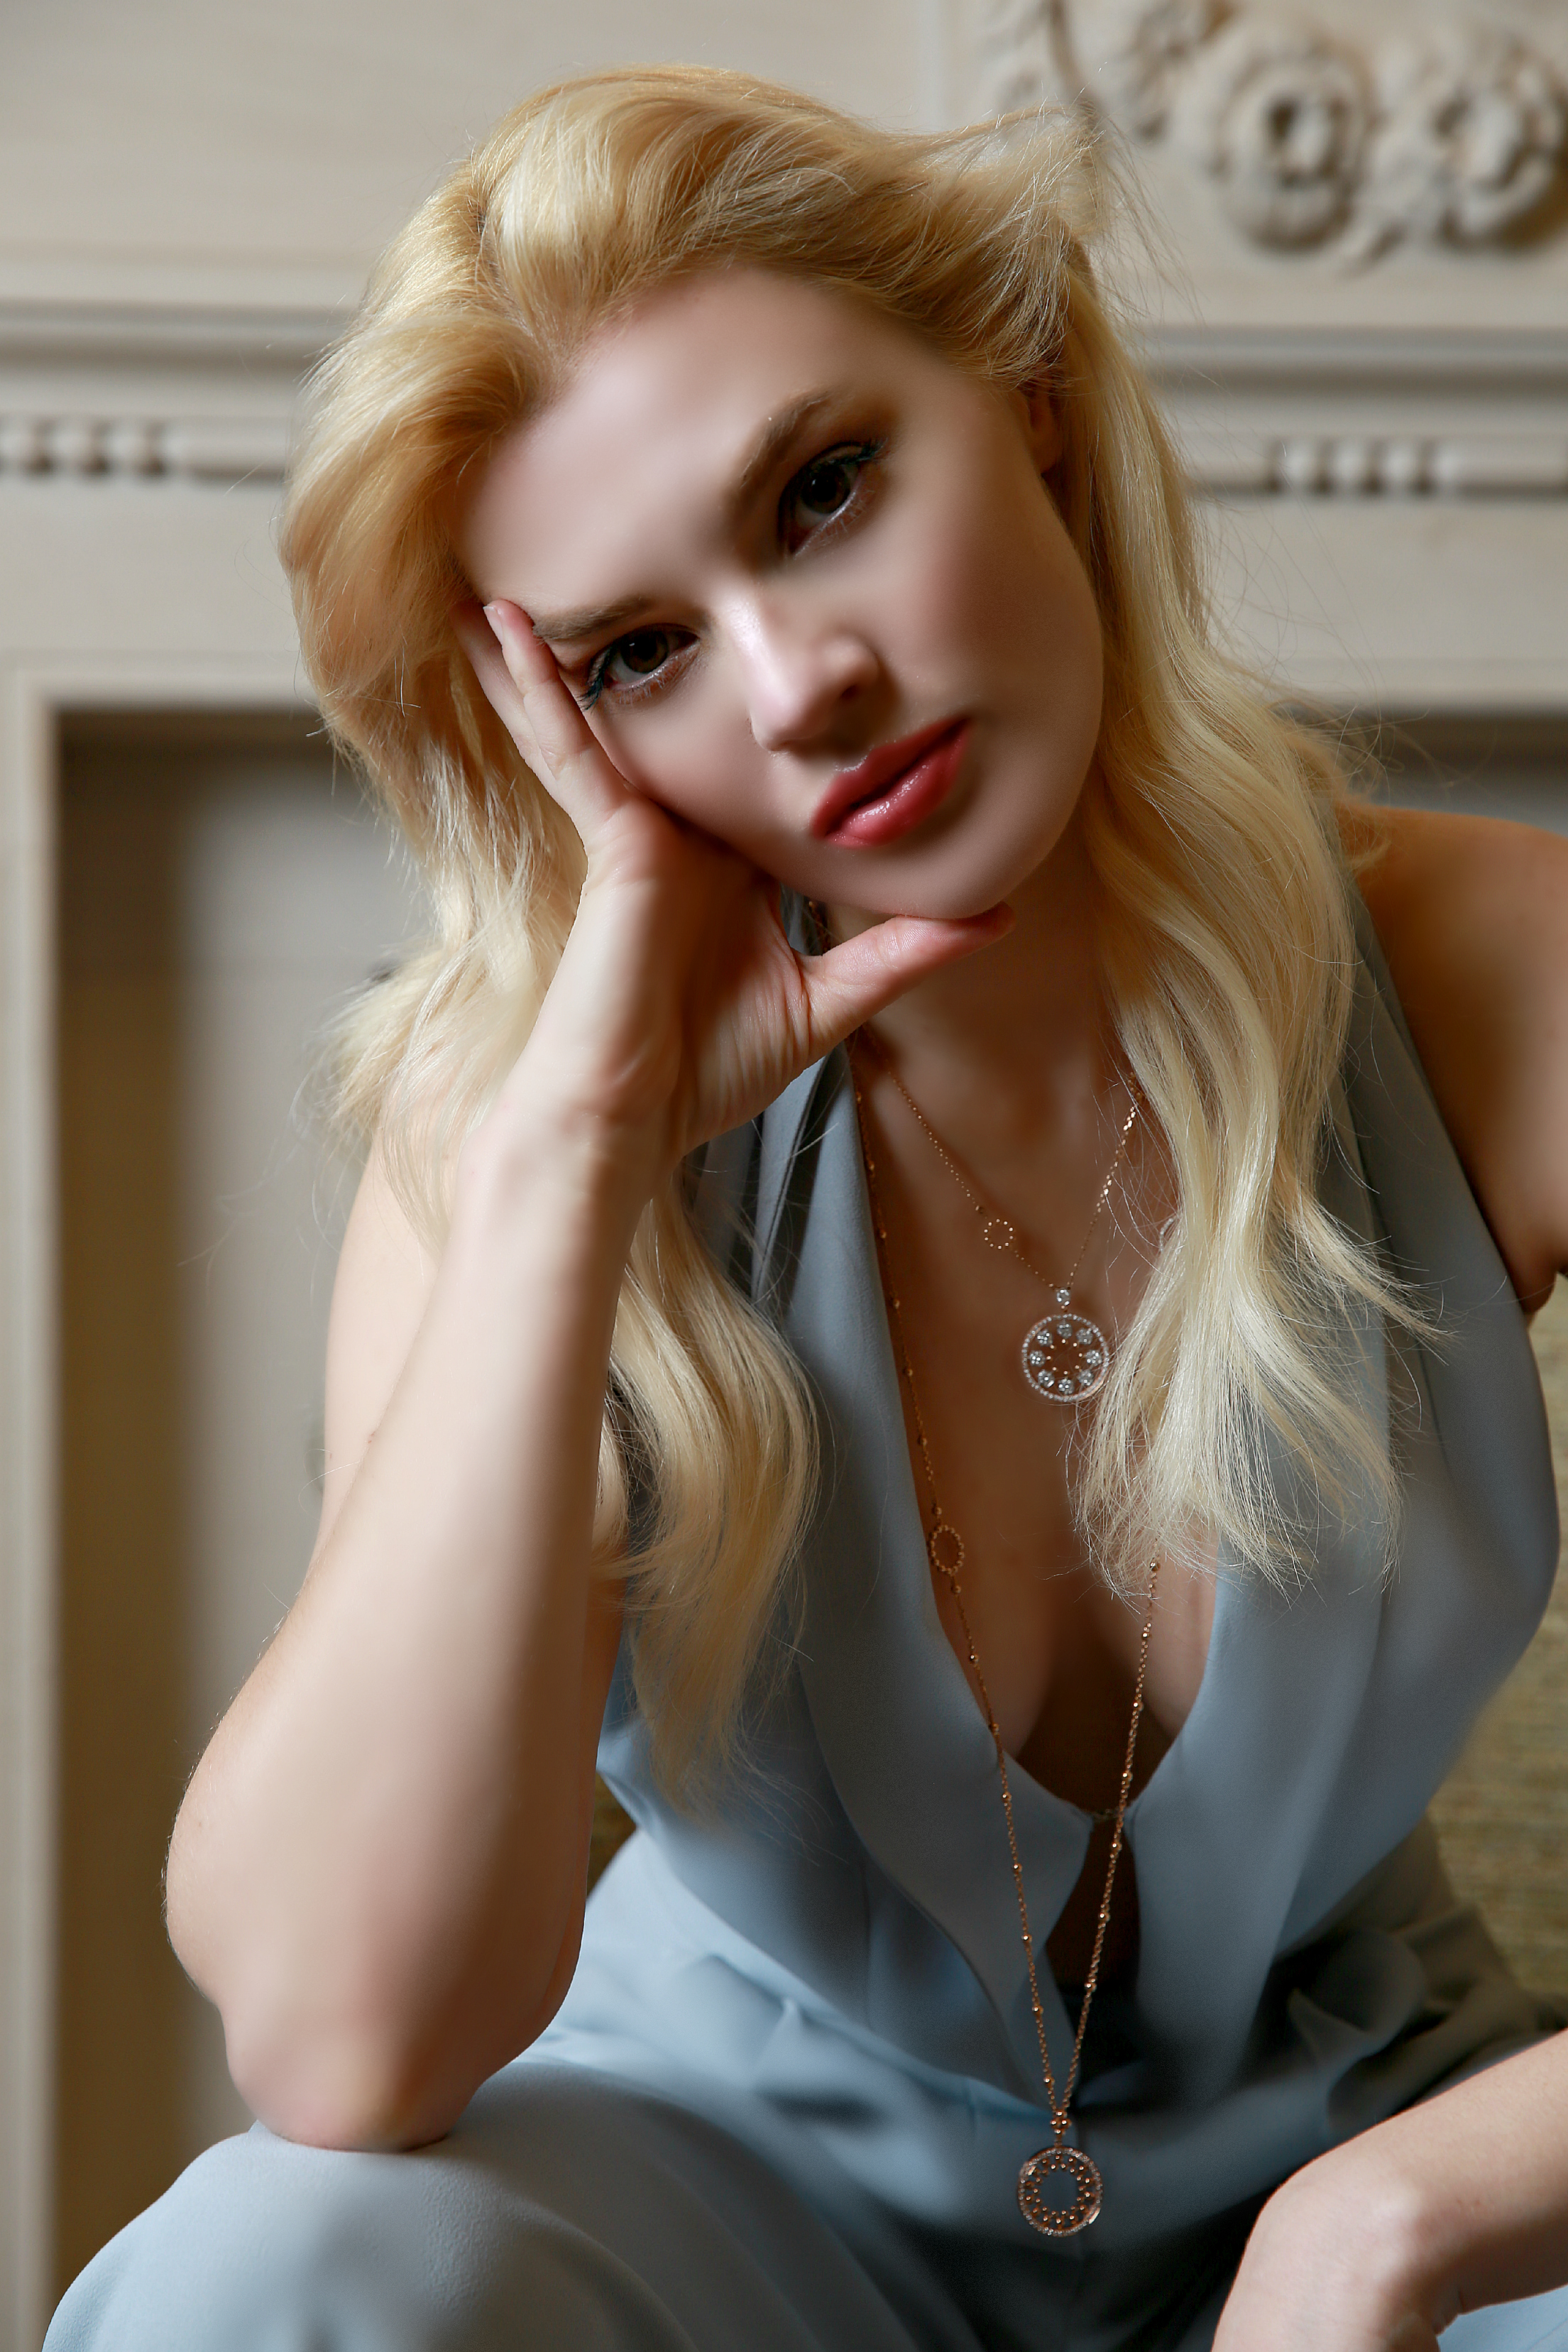 Charlotte Radford, in feature article wearing diamond pendant by Boodles of Bond street..